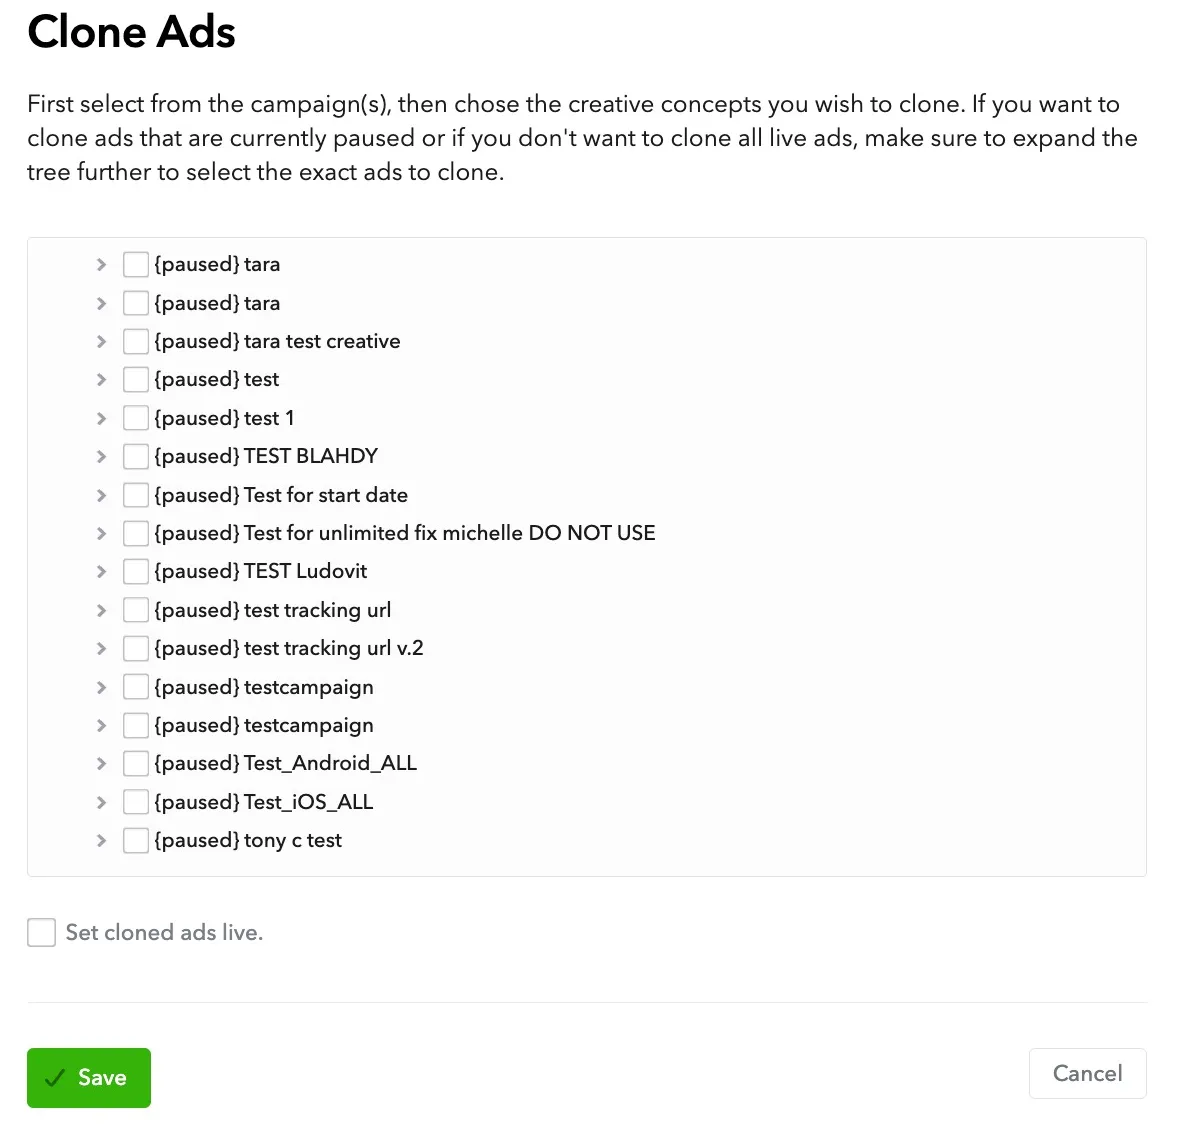 Clone Ads. First select from the campaign(s), then choose the creative concepts you wish to clone. If you want to clone ads that are currently paused or if you don’t want to clone all live ads, make sure to expend the tree further to select the exact ads to clone. Set cloned ads live checkbox. Save button. Cancel button.